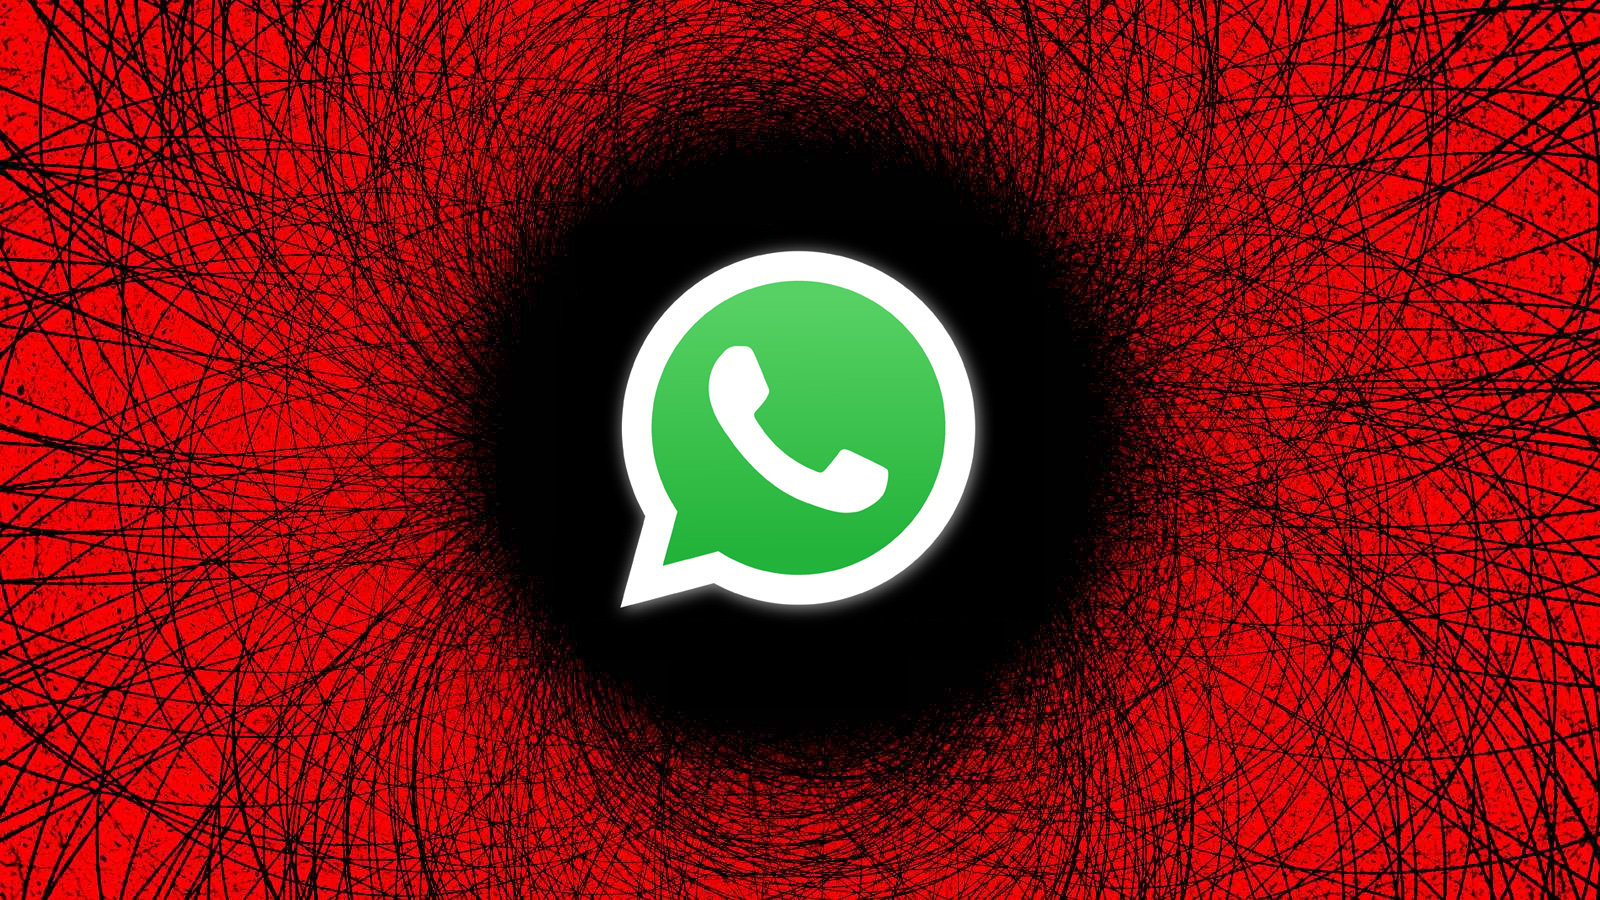 Unofficial WhatsApp Android app caught stealing users’ accounts